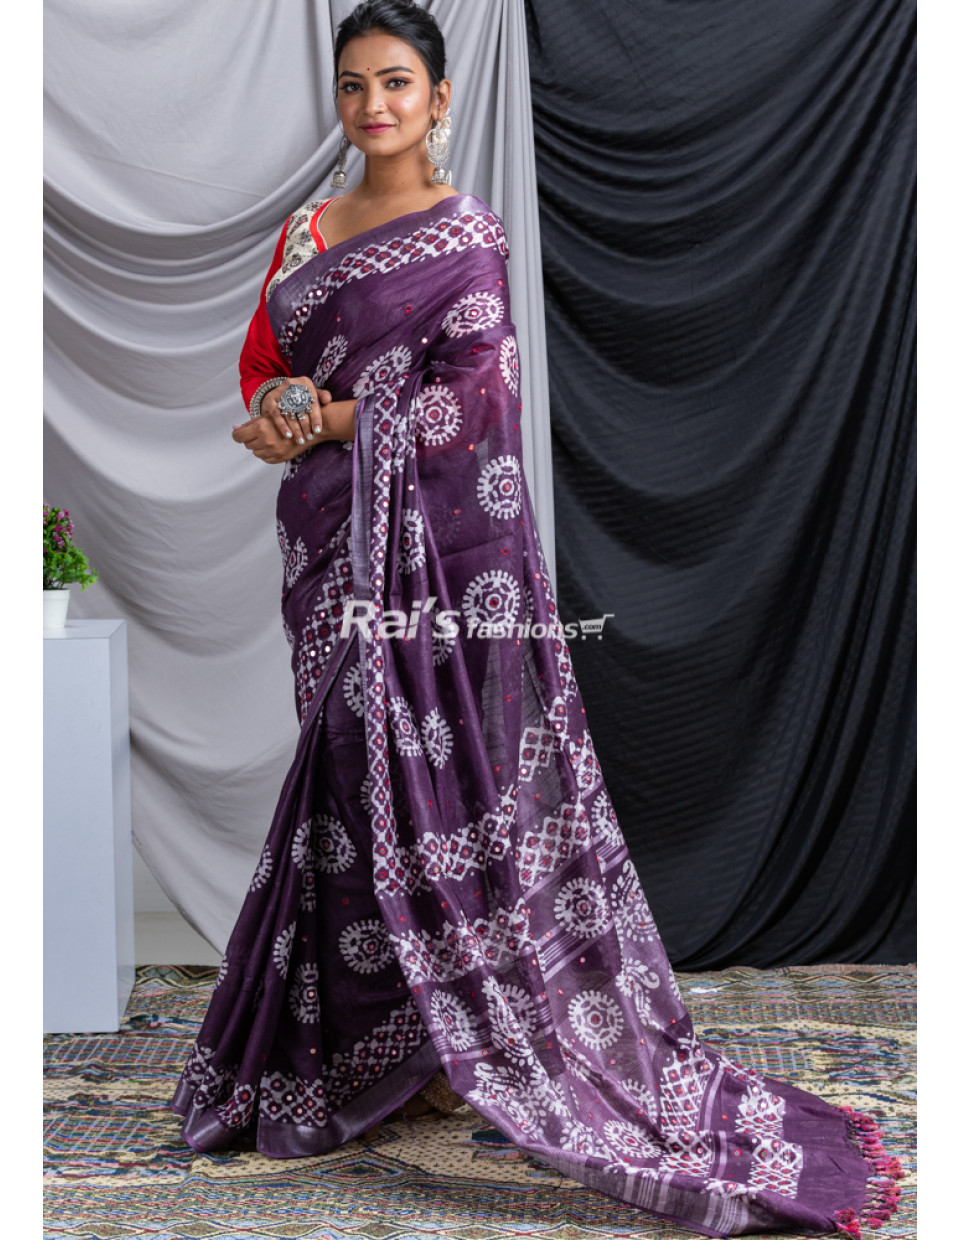 Mirror Worked Cotton Slab Saree With All Over Batik Print (KR1439)